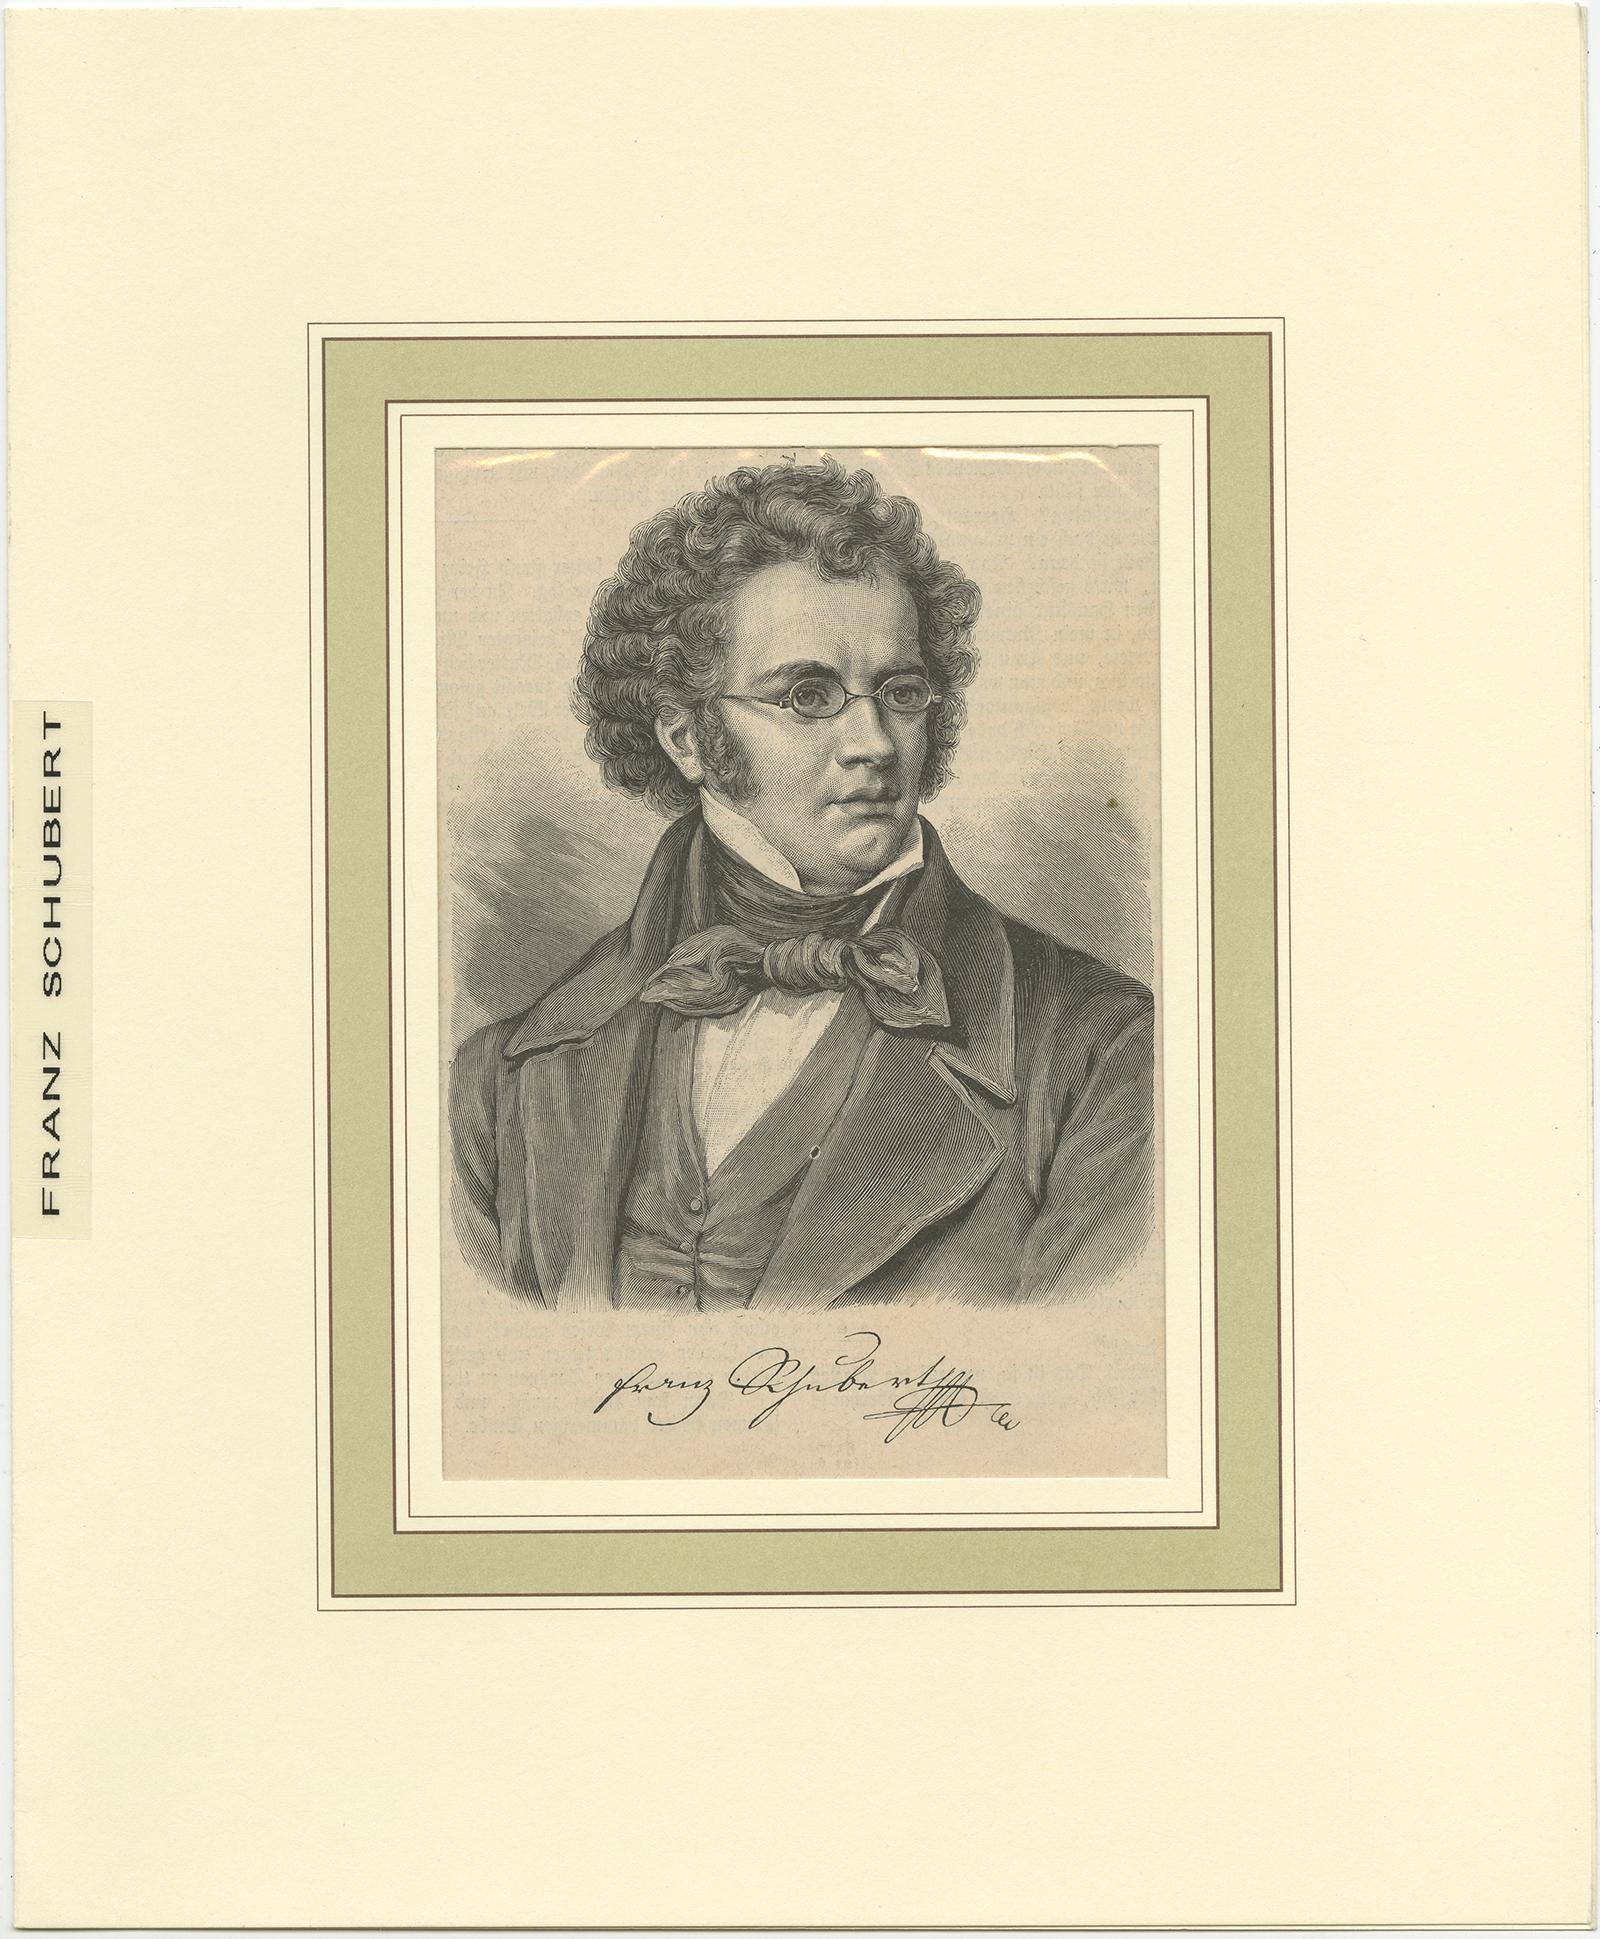 Antique print titled 'Franz Schubert'. Portrait of Franz Schubert. Franz Peter Schubert was an Austrian composer of the late Classical and early Romantic eras.

Artists and Engravers: Anonymous.

Condition: Good, age-related toning. This print